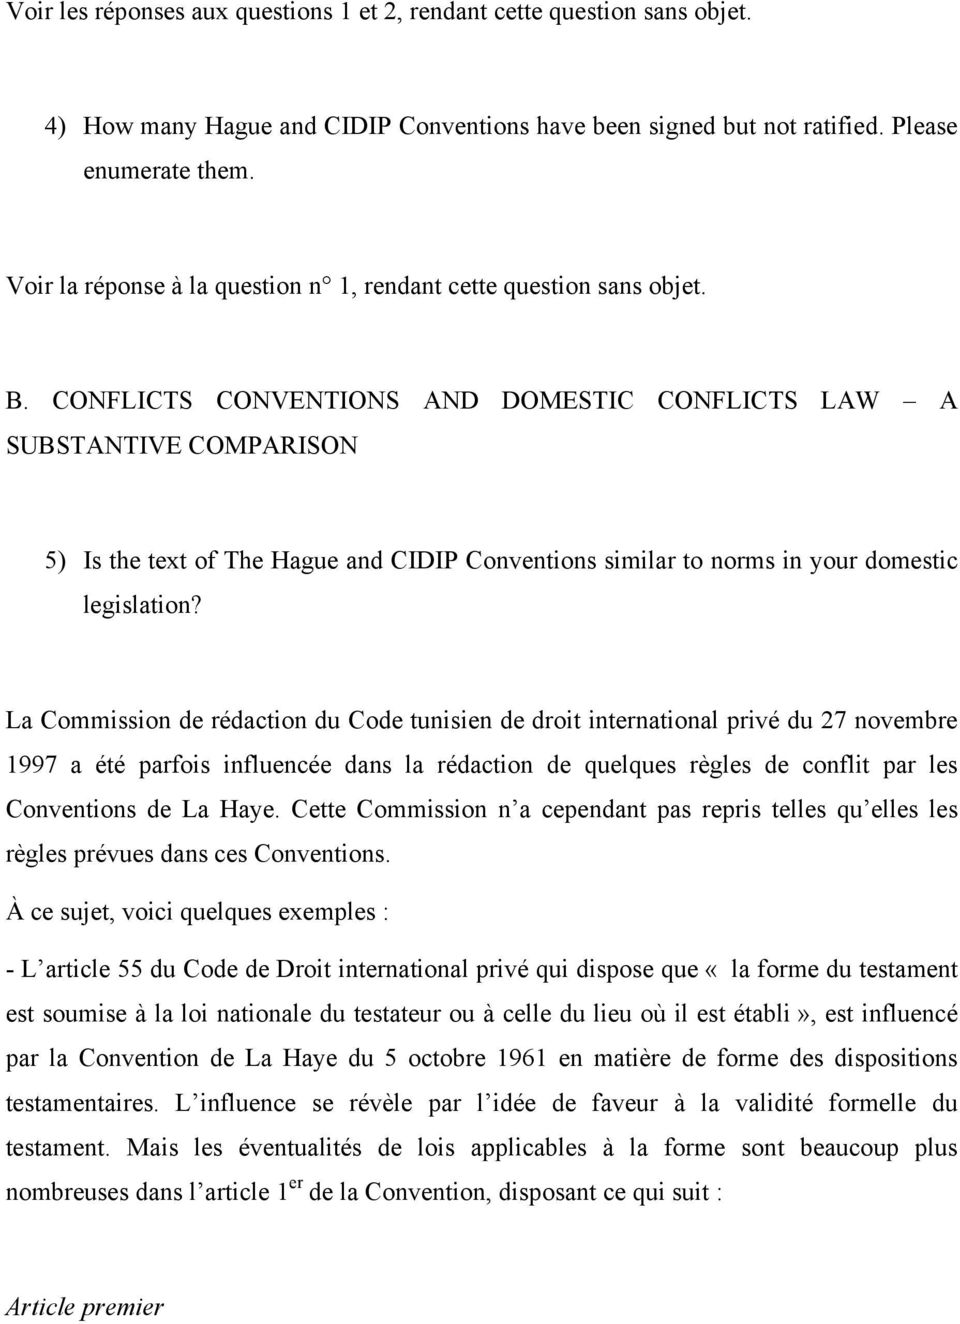 CONFLICTS CONVENTIONS AND DOMESTIC CONFLICTS LAW A SUBSTANTIVE COMPARISON 5) Is the text of The Hague and CIDIP Conventions similar to norms in your domestic legislation?